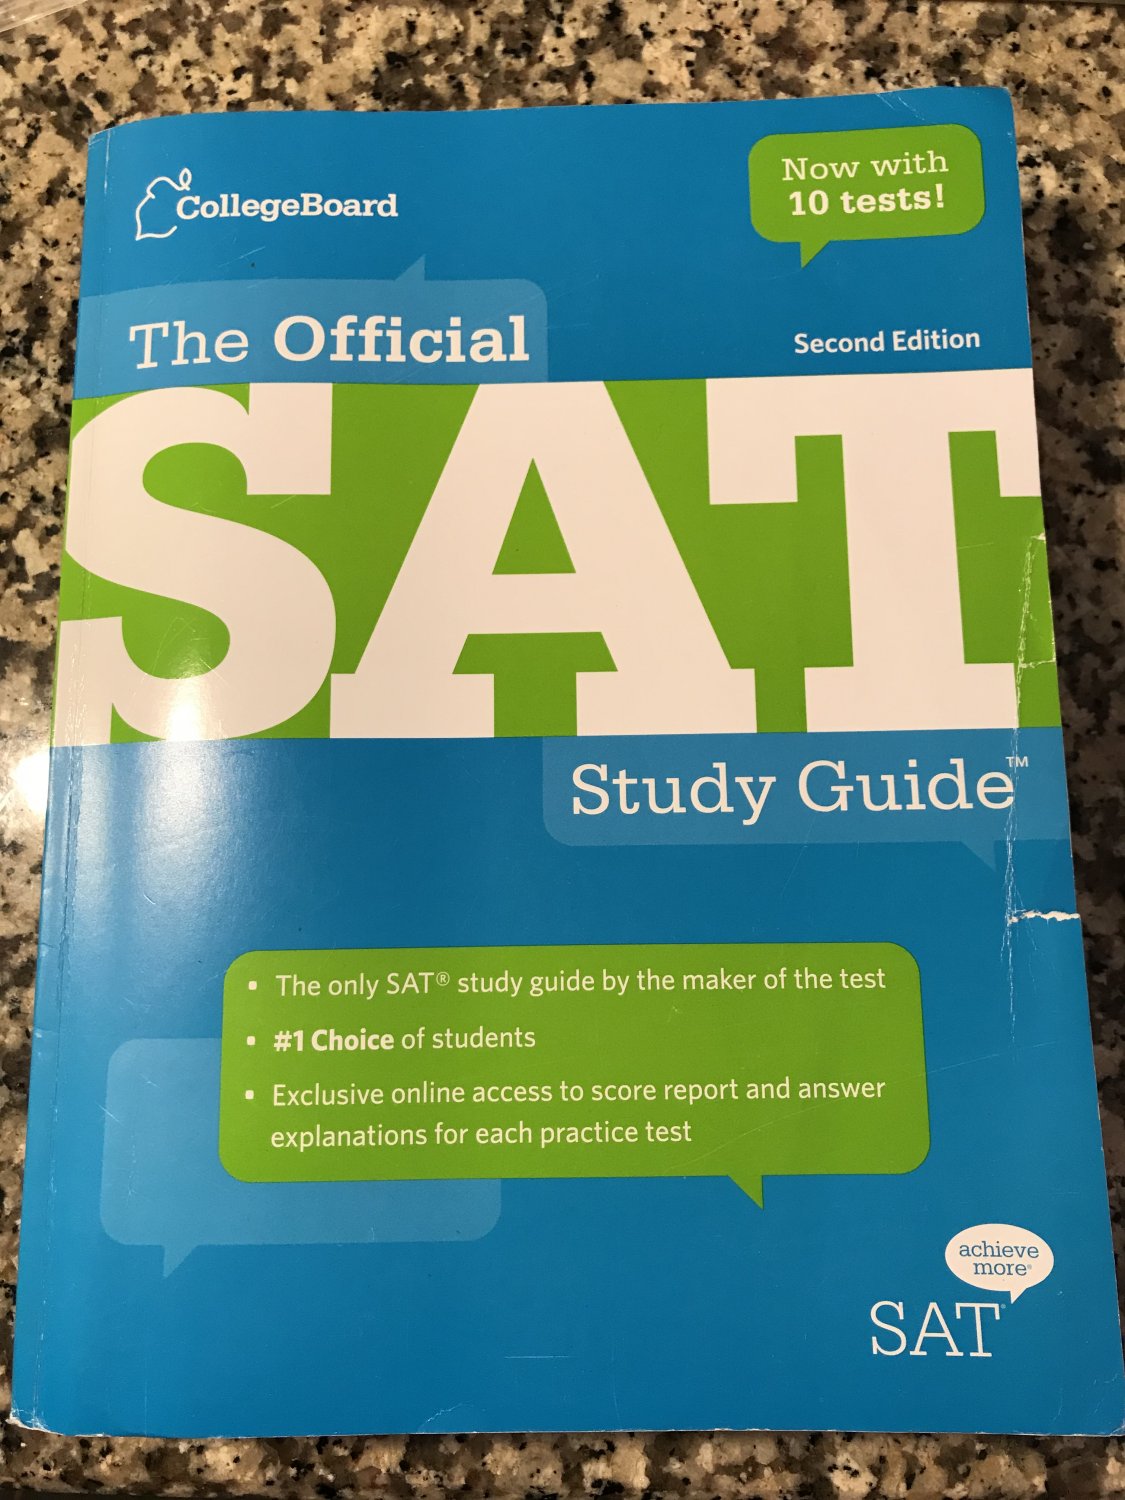 The Official SAT Study Guide Second Edition 2nd Edition by The College